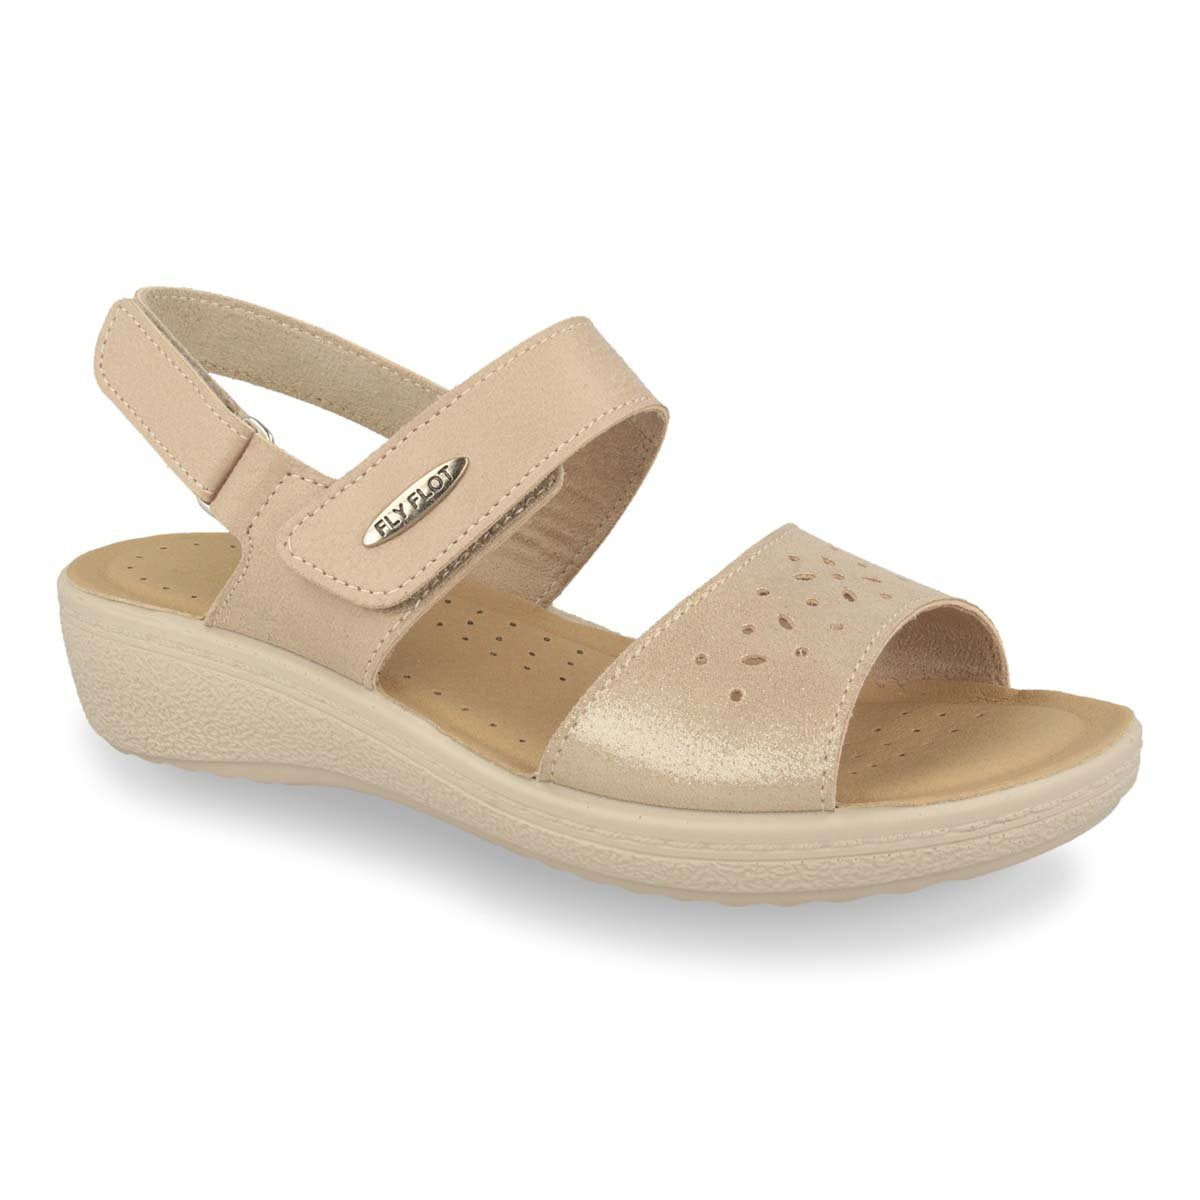 See the Soft Microfiber Back Strap Women Sandals With Anti-Shock Cushioned Leather Insole in the colour BEIGE, available in various sizes